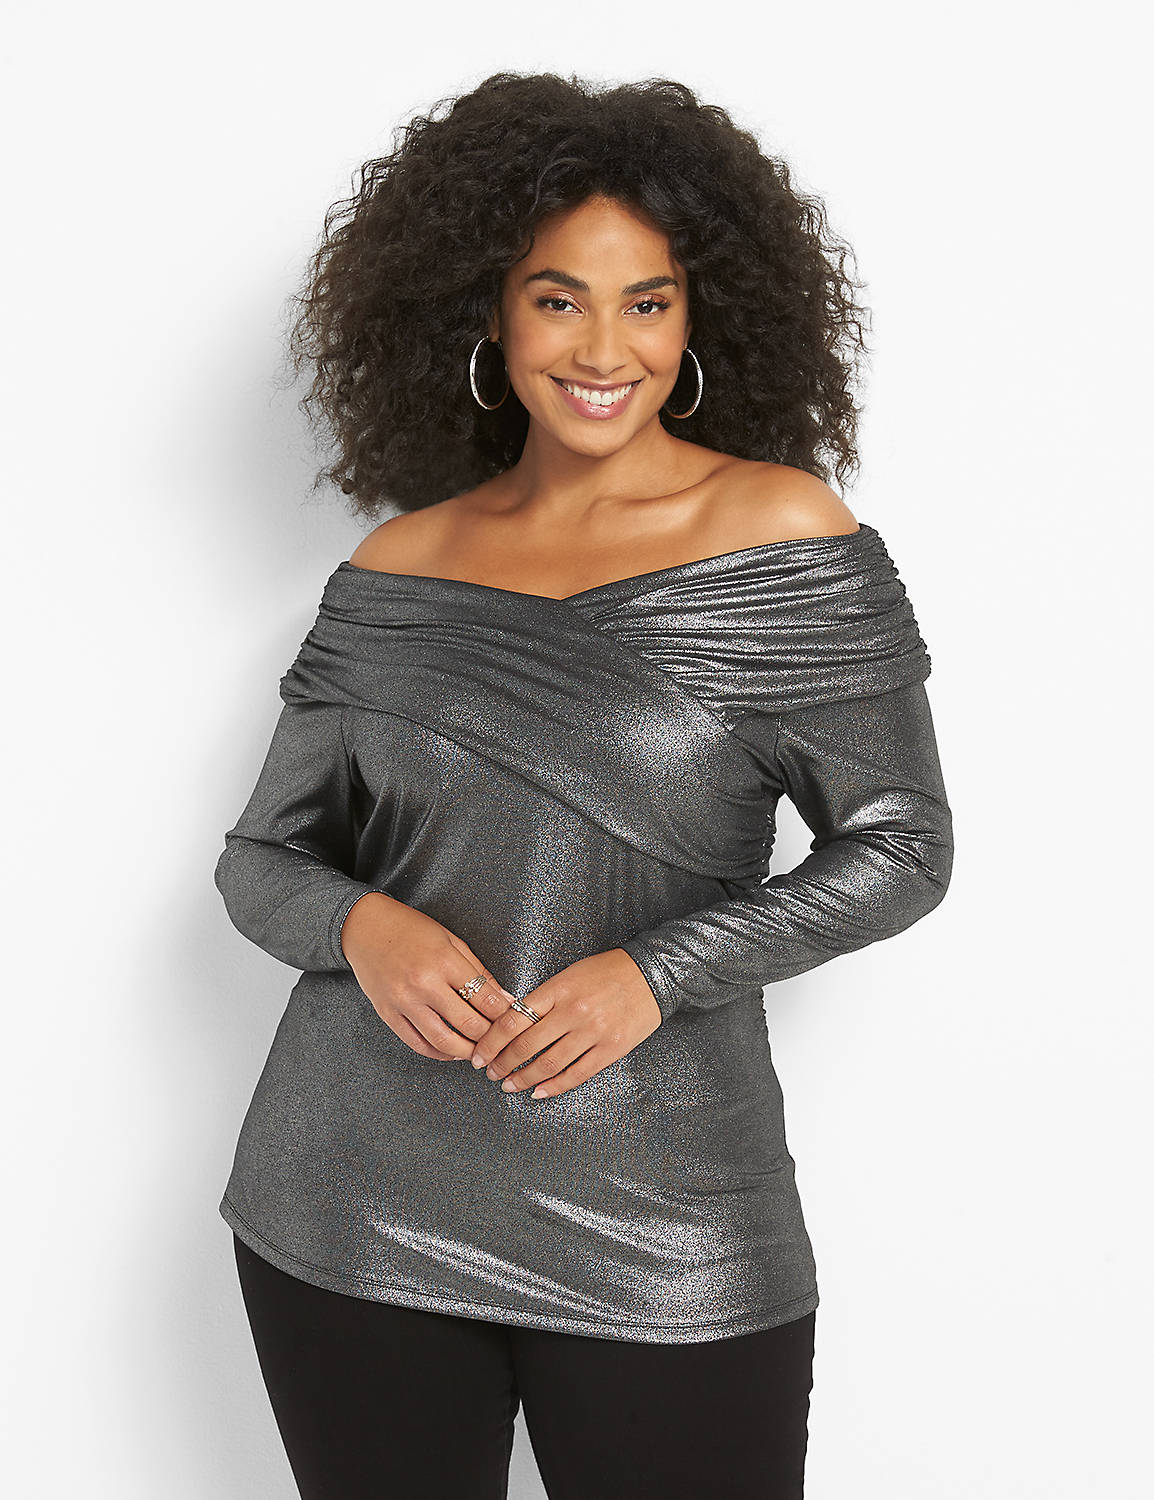 Long Sleeve Off The Shoulder Illusion In Metallic Knit Top 1124646:Metallic Grey:22/24 Product Image 1